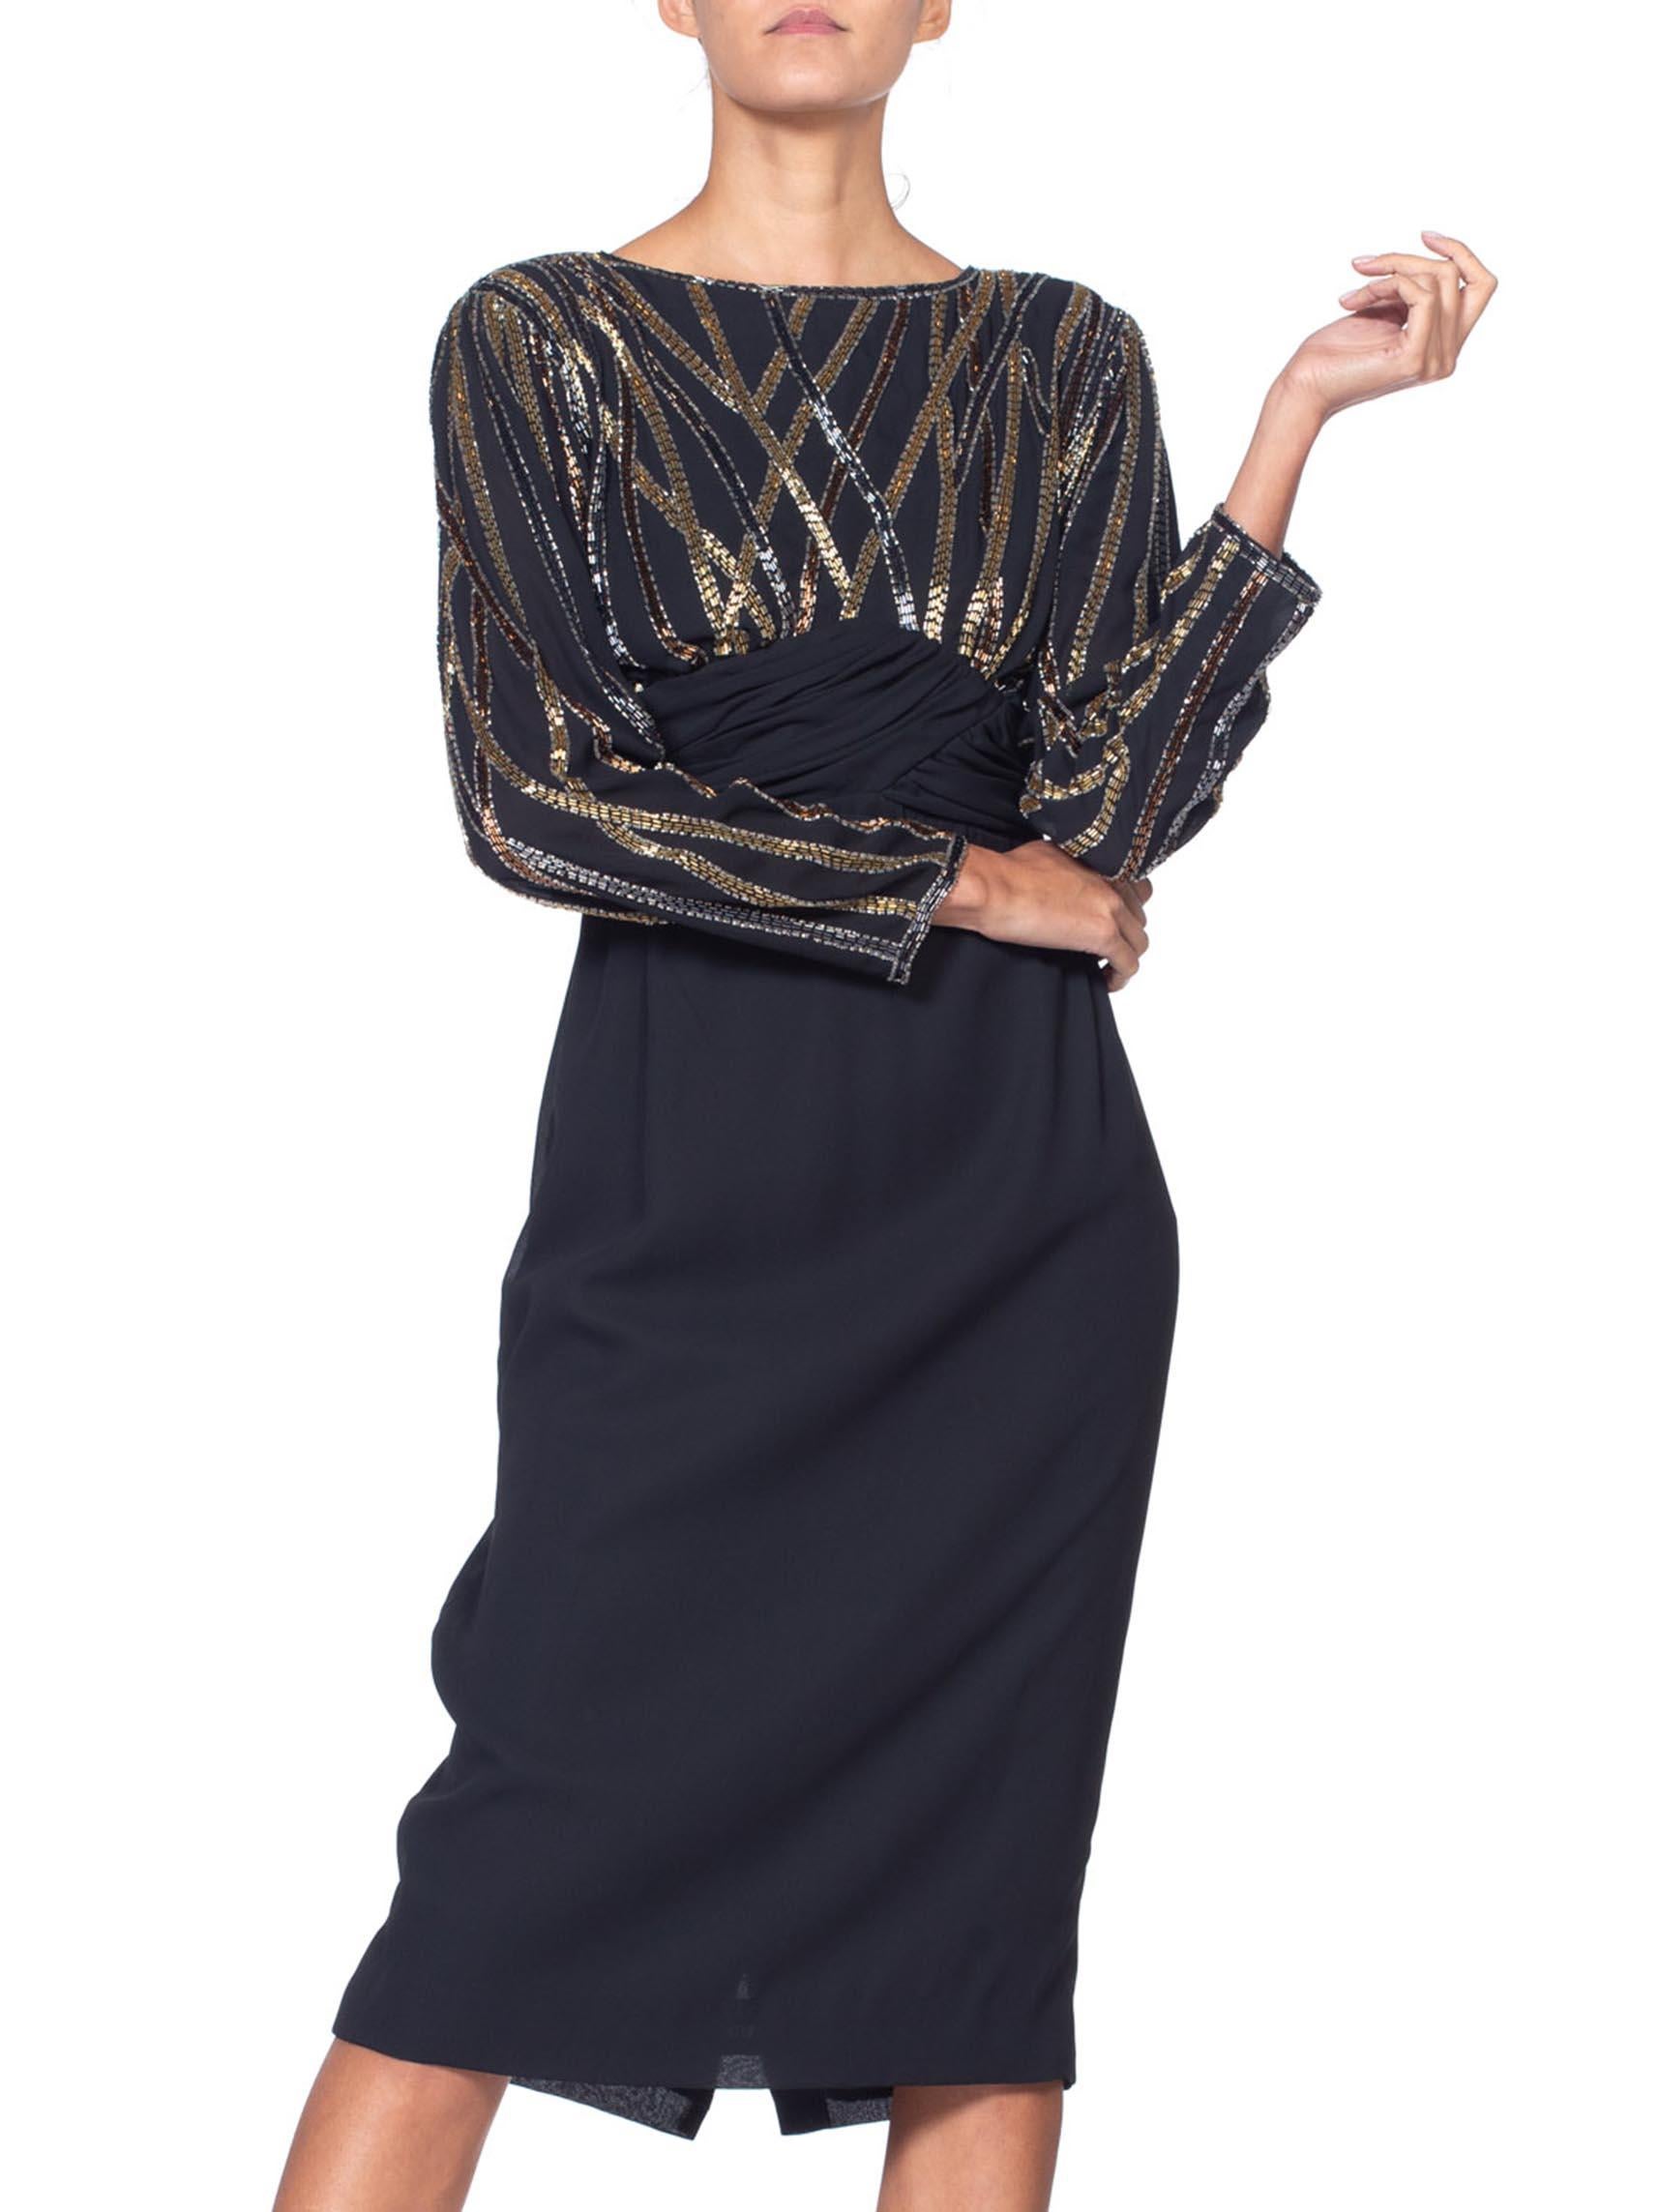 1980S BOB MACKIE Style Black Hand Beaded Polyester Chiffon Long Sleeve Cocktail In Excellent Condition For Sale In New York, NY